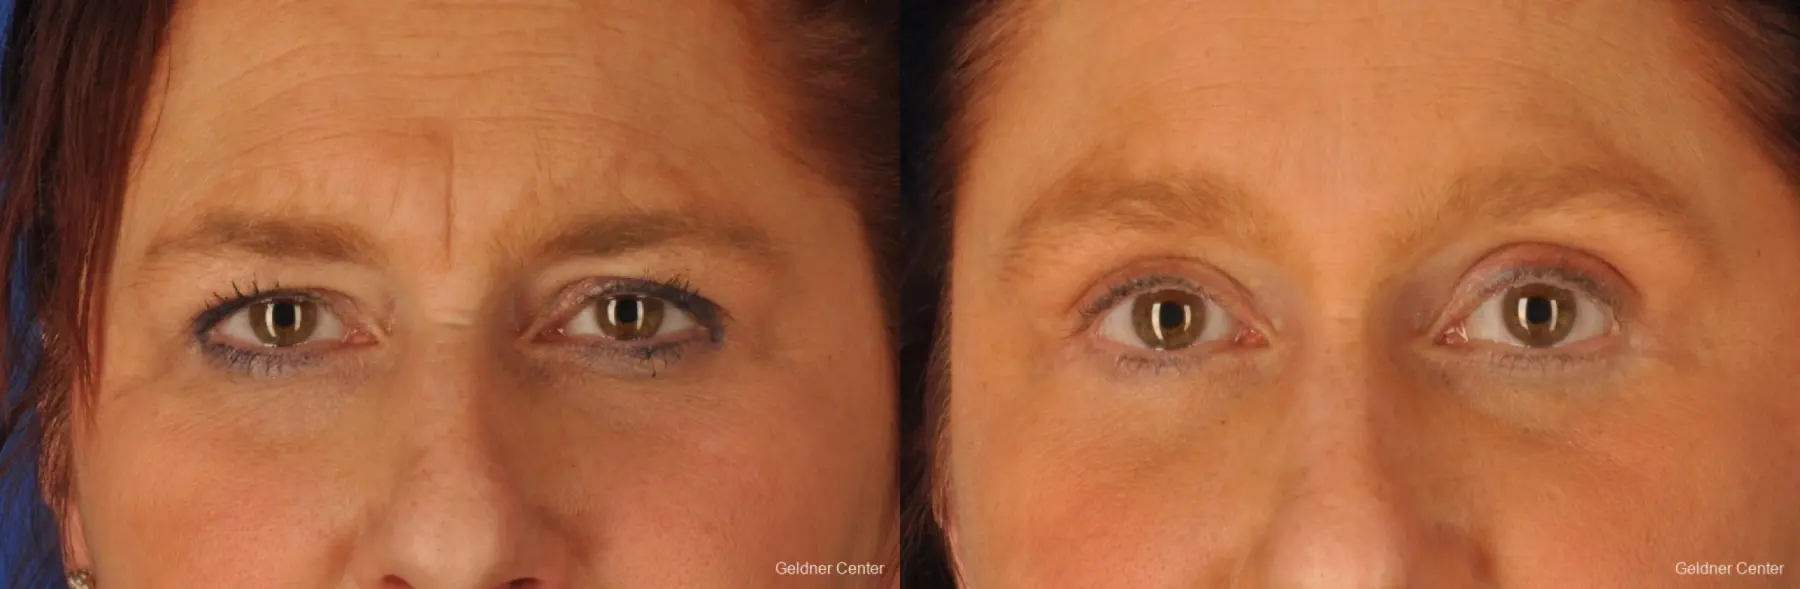 Eyelid Lift: Patient 7 - Before and After 1